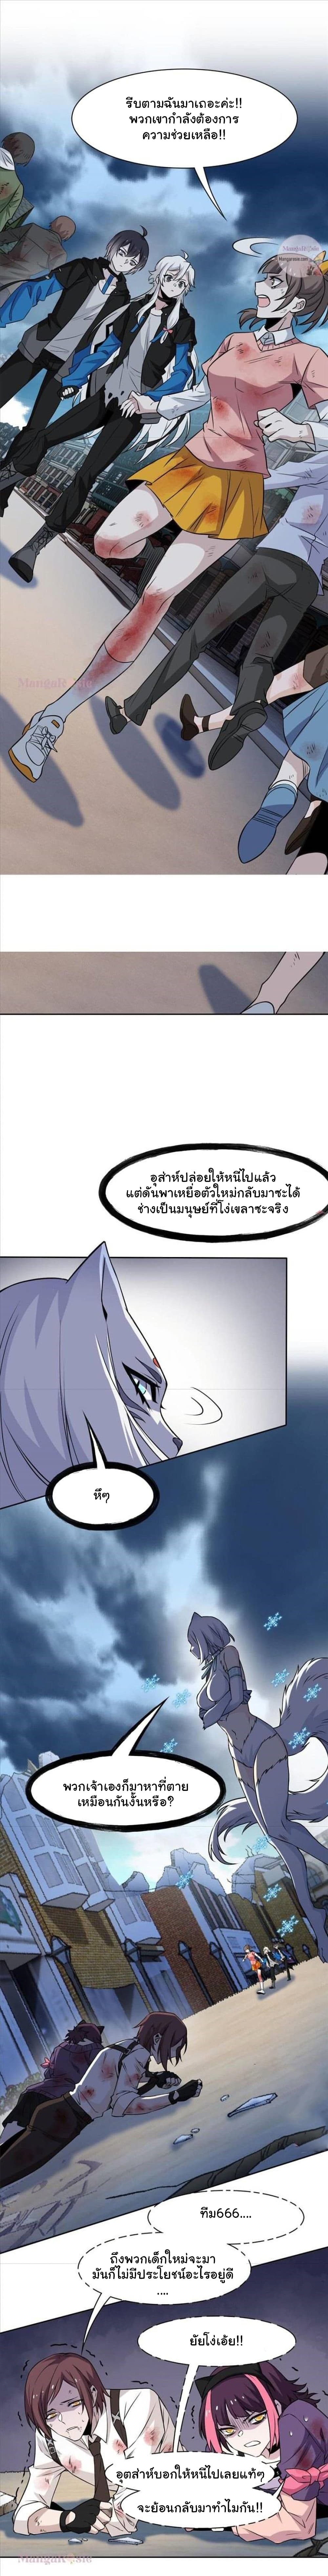 The Strong Man From The Mental Hospital  99 แปลไทย